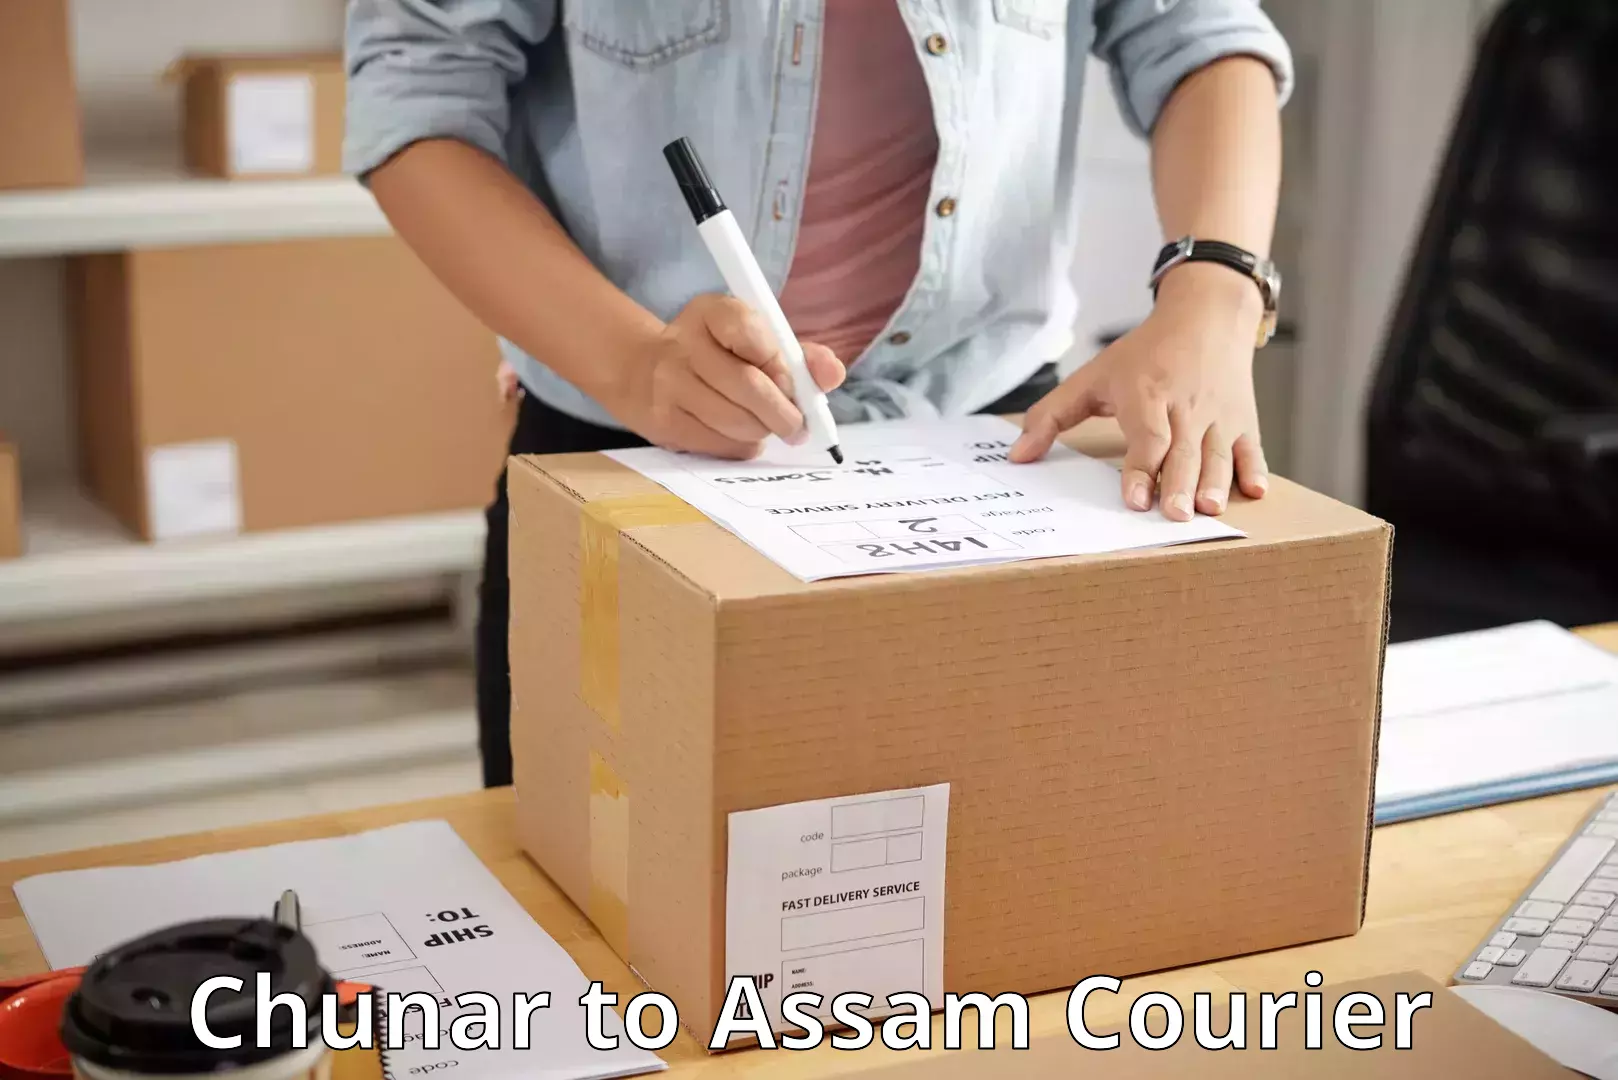 Doorstep delivery service Chunar to Assam